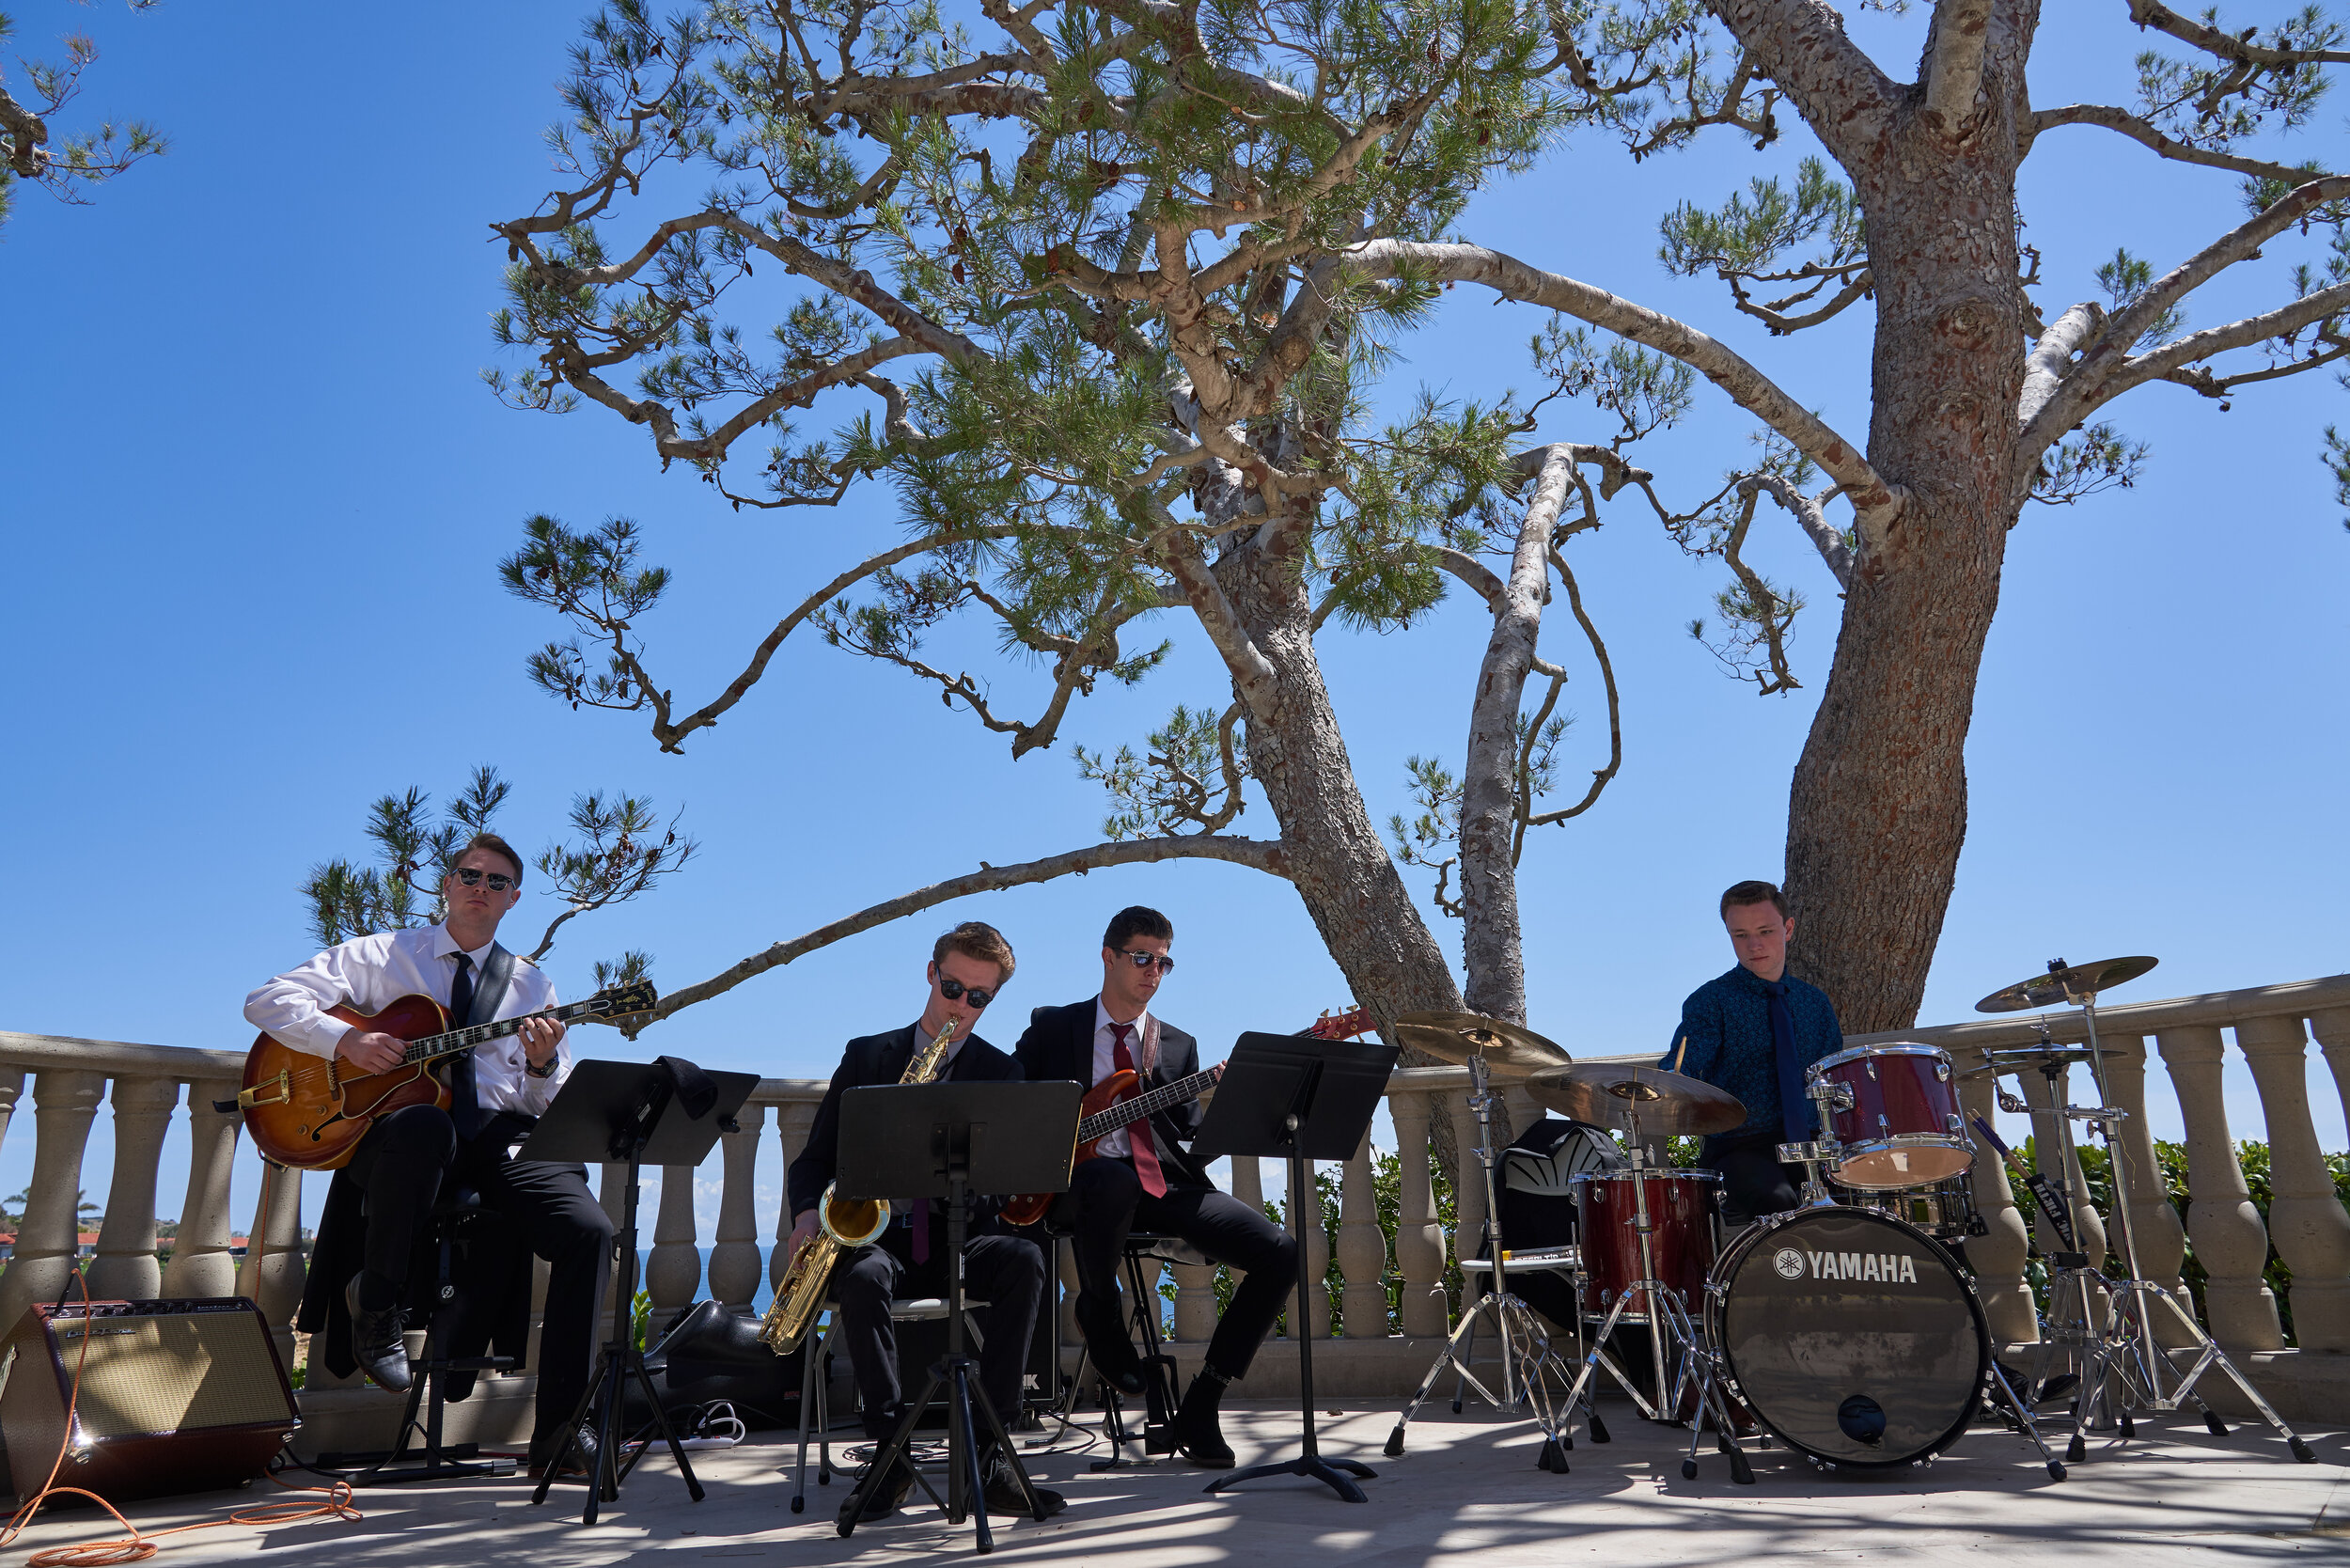 A band of guitar players, drummer and Saxophonist play under a tree.